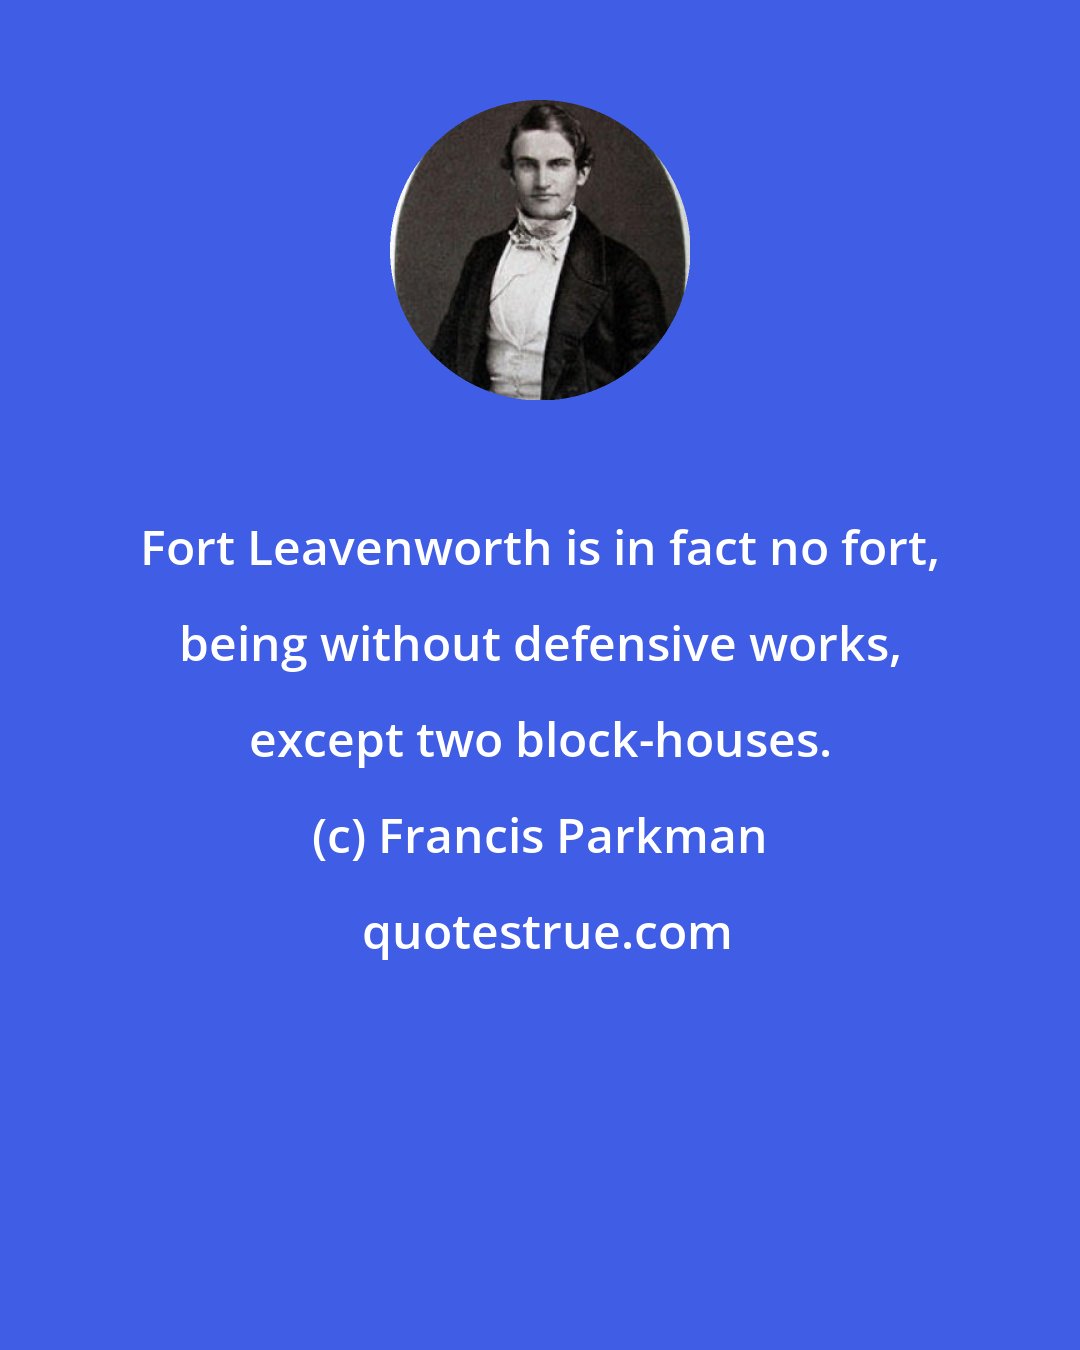 Francis Parkman: Fort Leavenworth is in fact no fort, being without defensive works, except two block-houses.